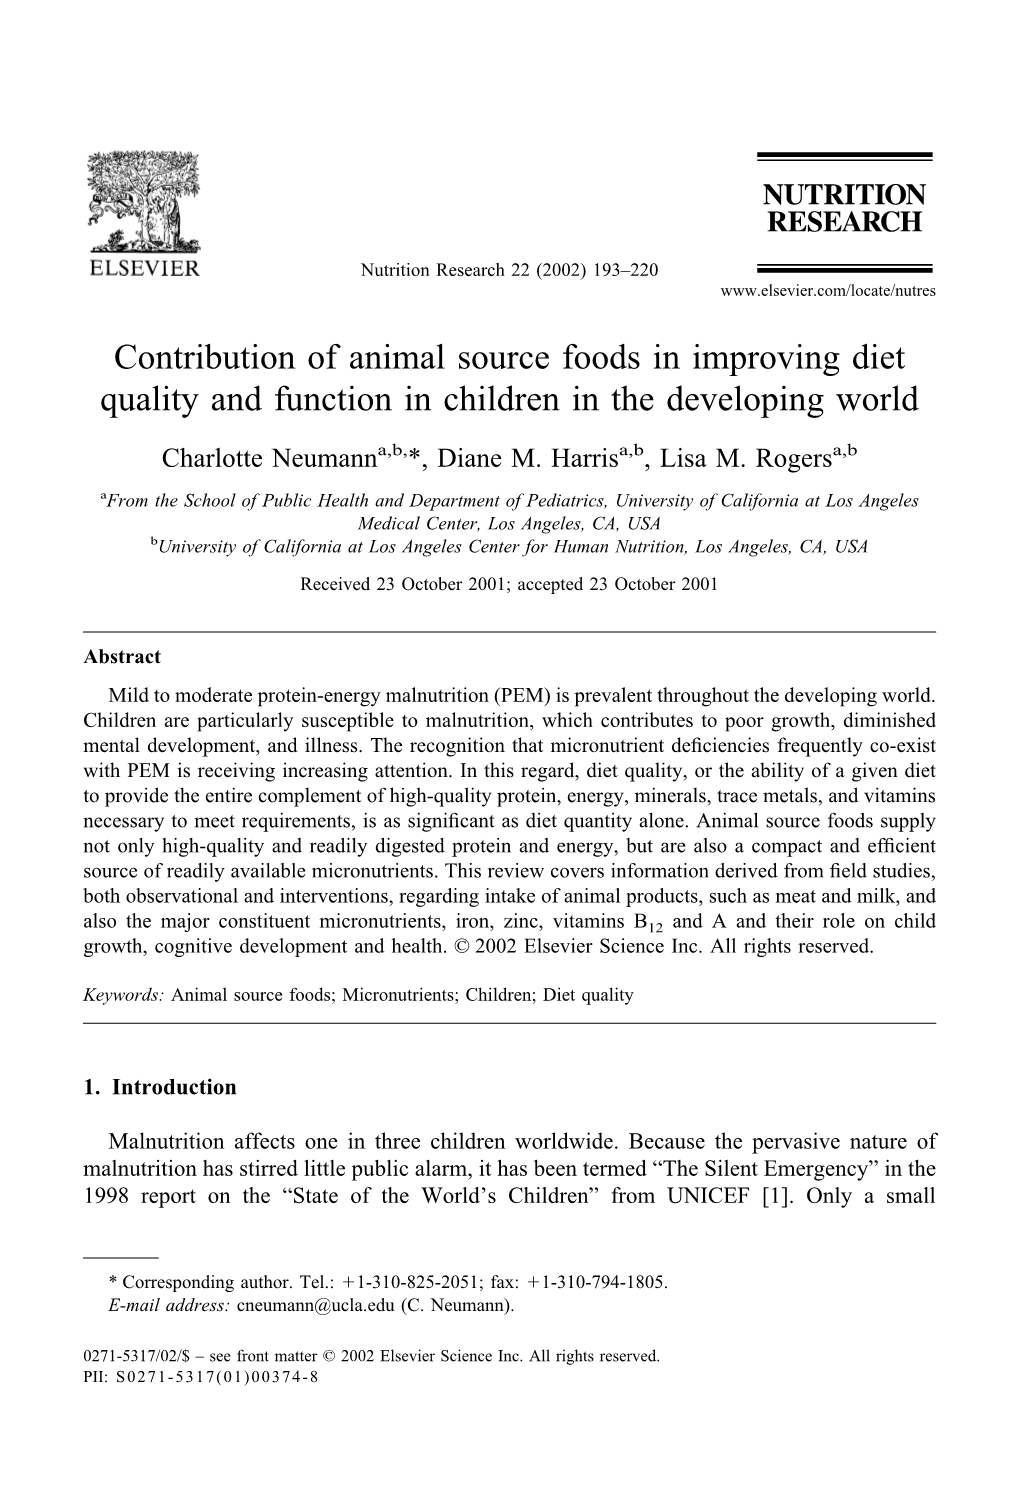 Contribution of Animal Source Foods in Improving Diet Quality and Function in Children in the Developing World